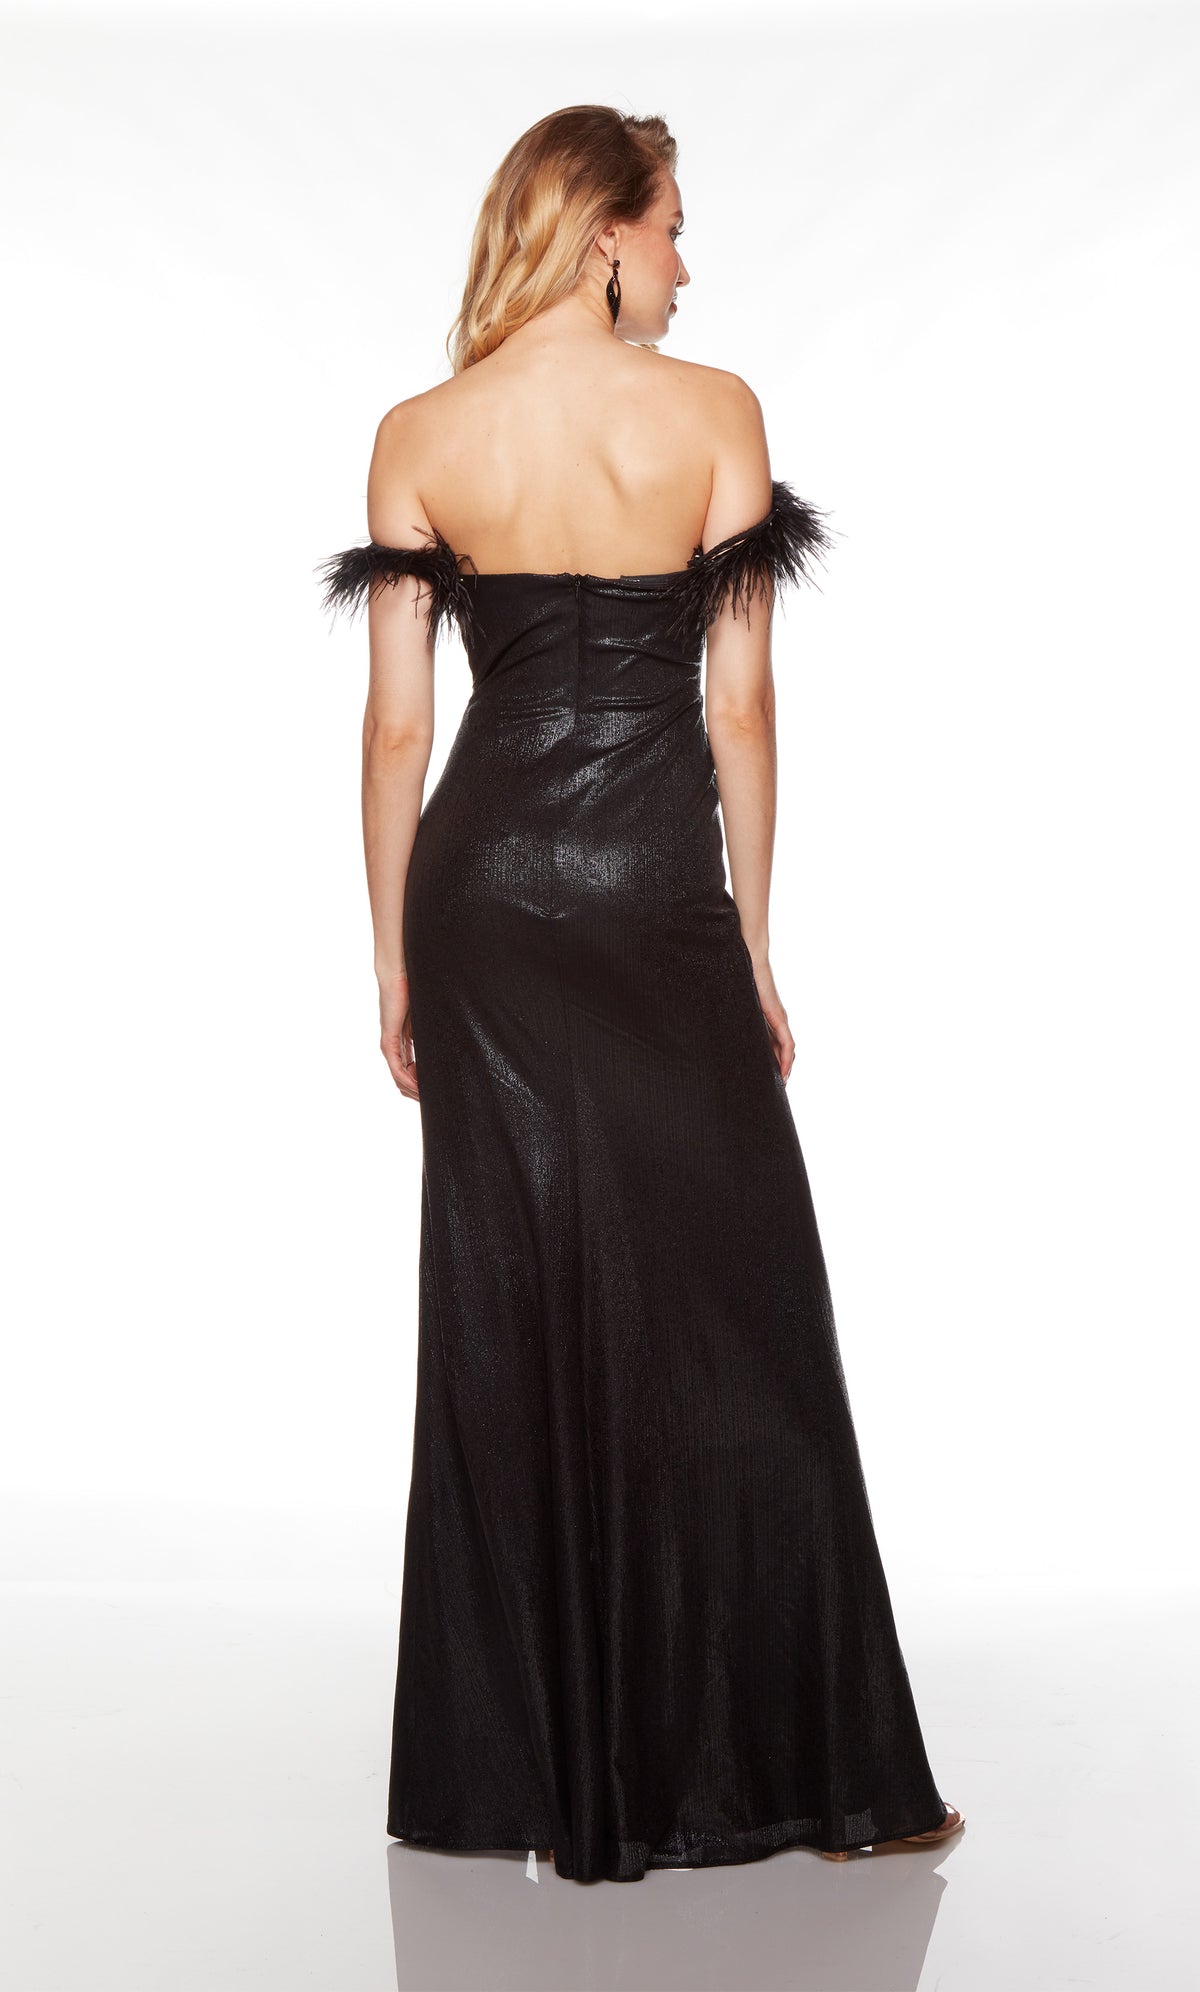 Long black off the shoulder prom dress with a zip up back and feather trim.